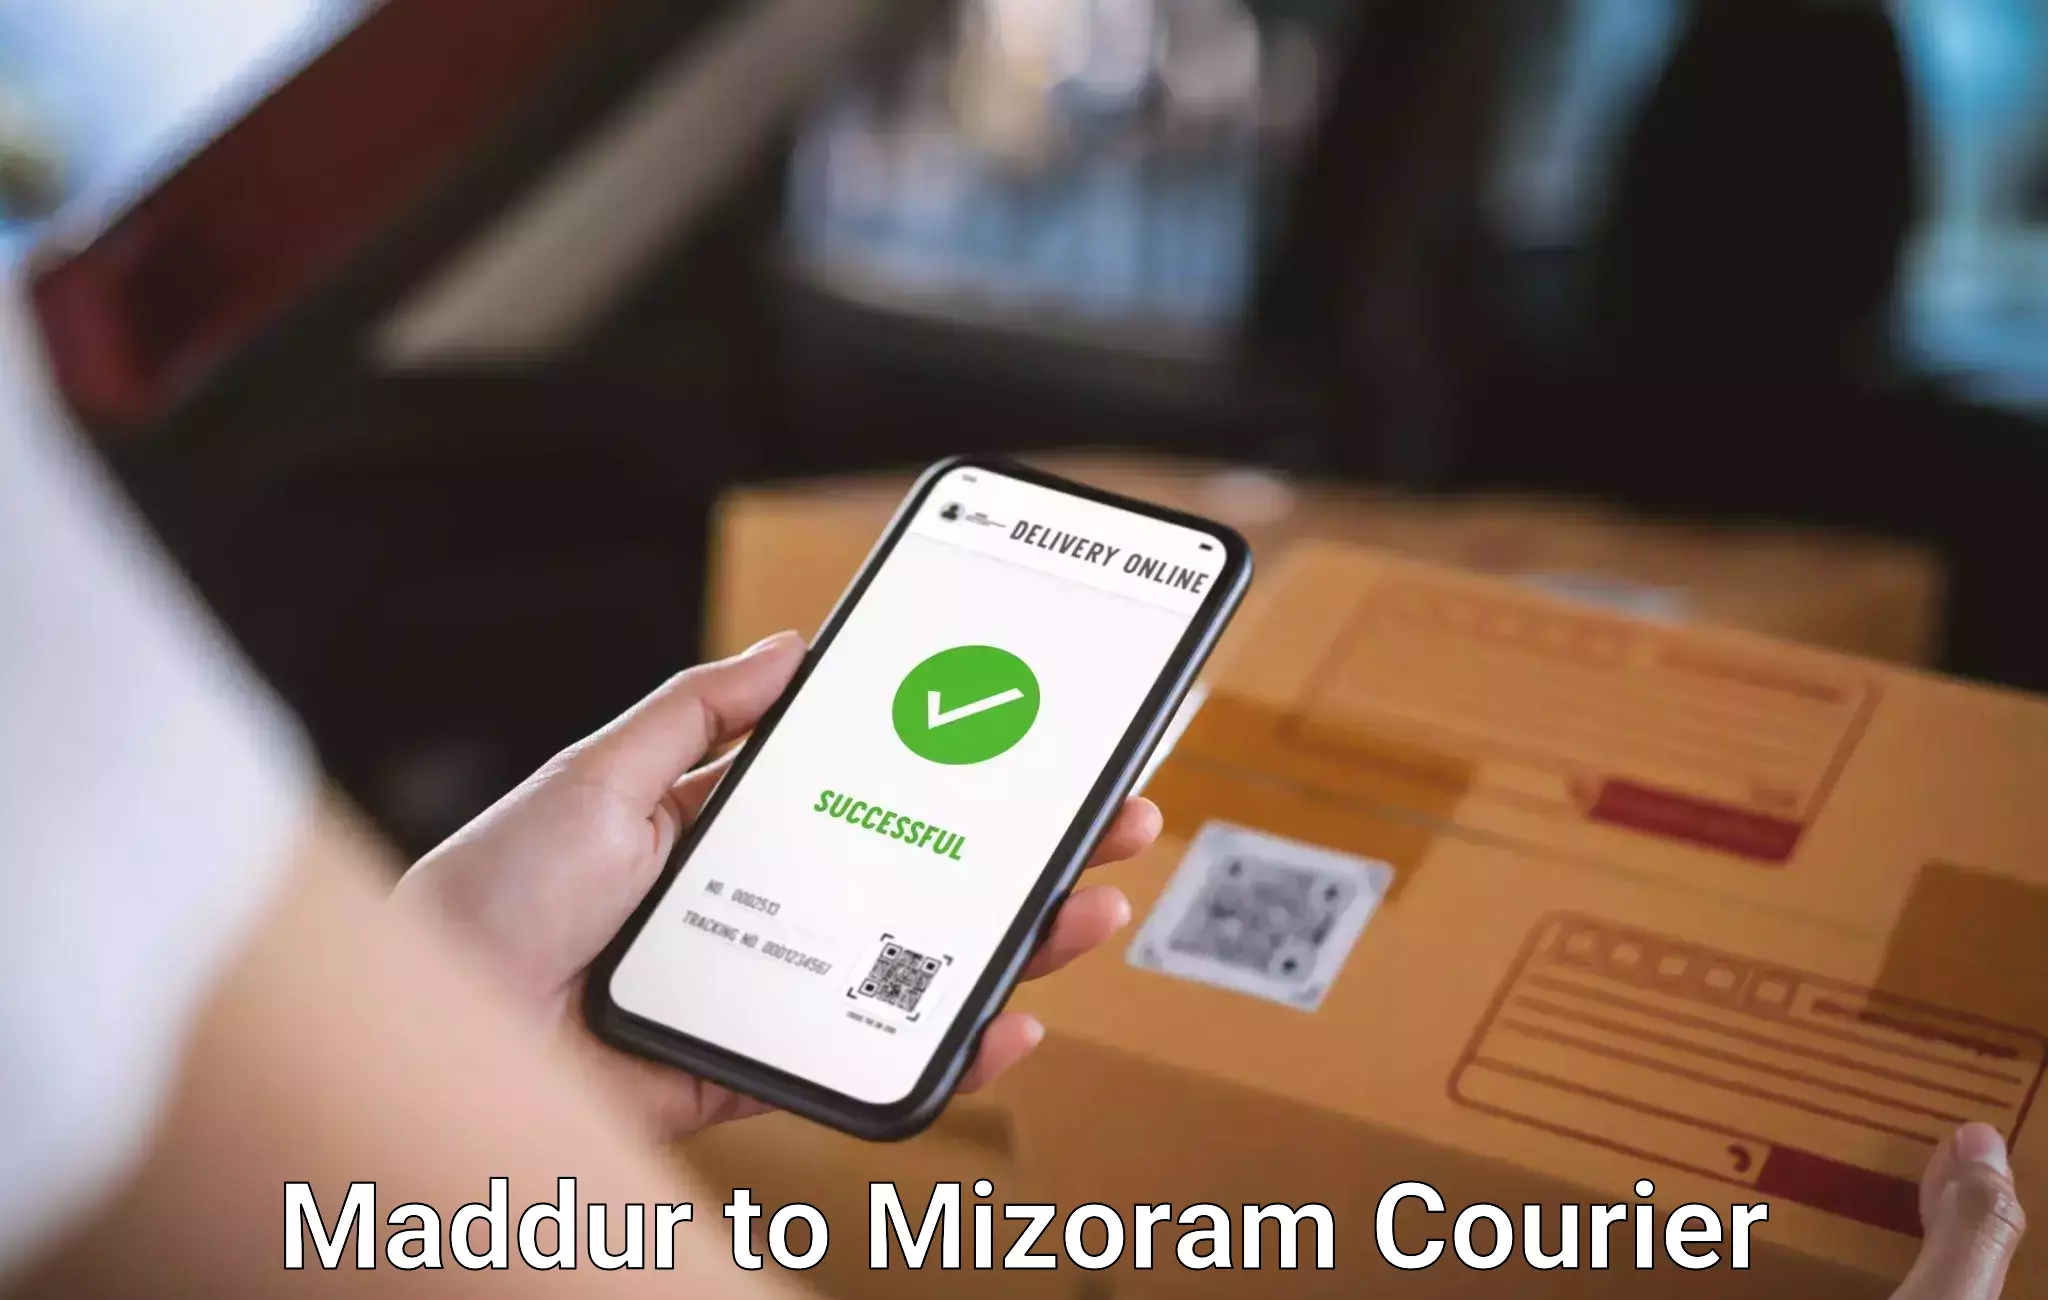 Fast track baggage delivery Maddur to Mizoram